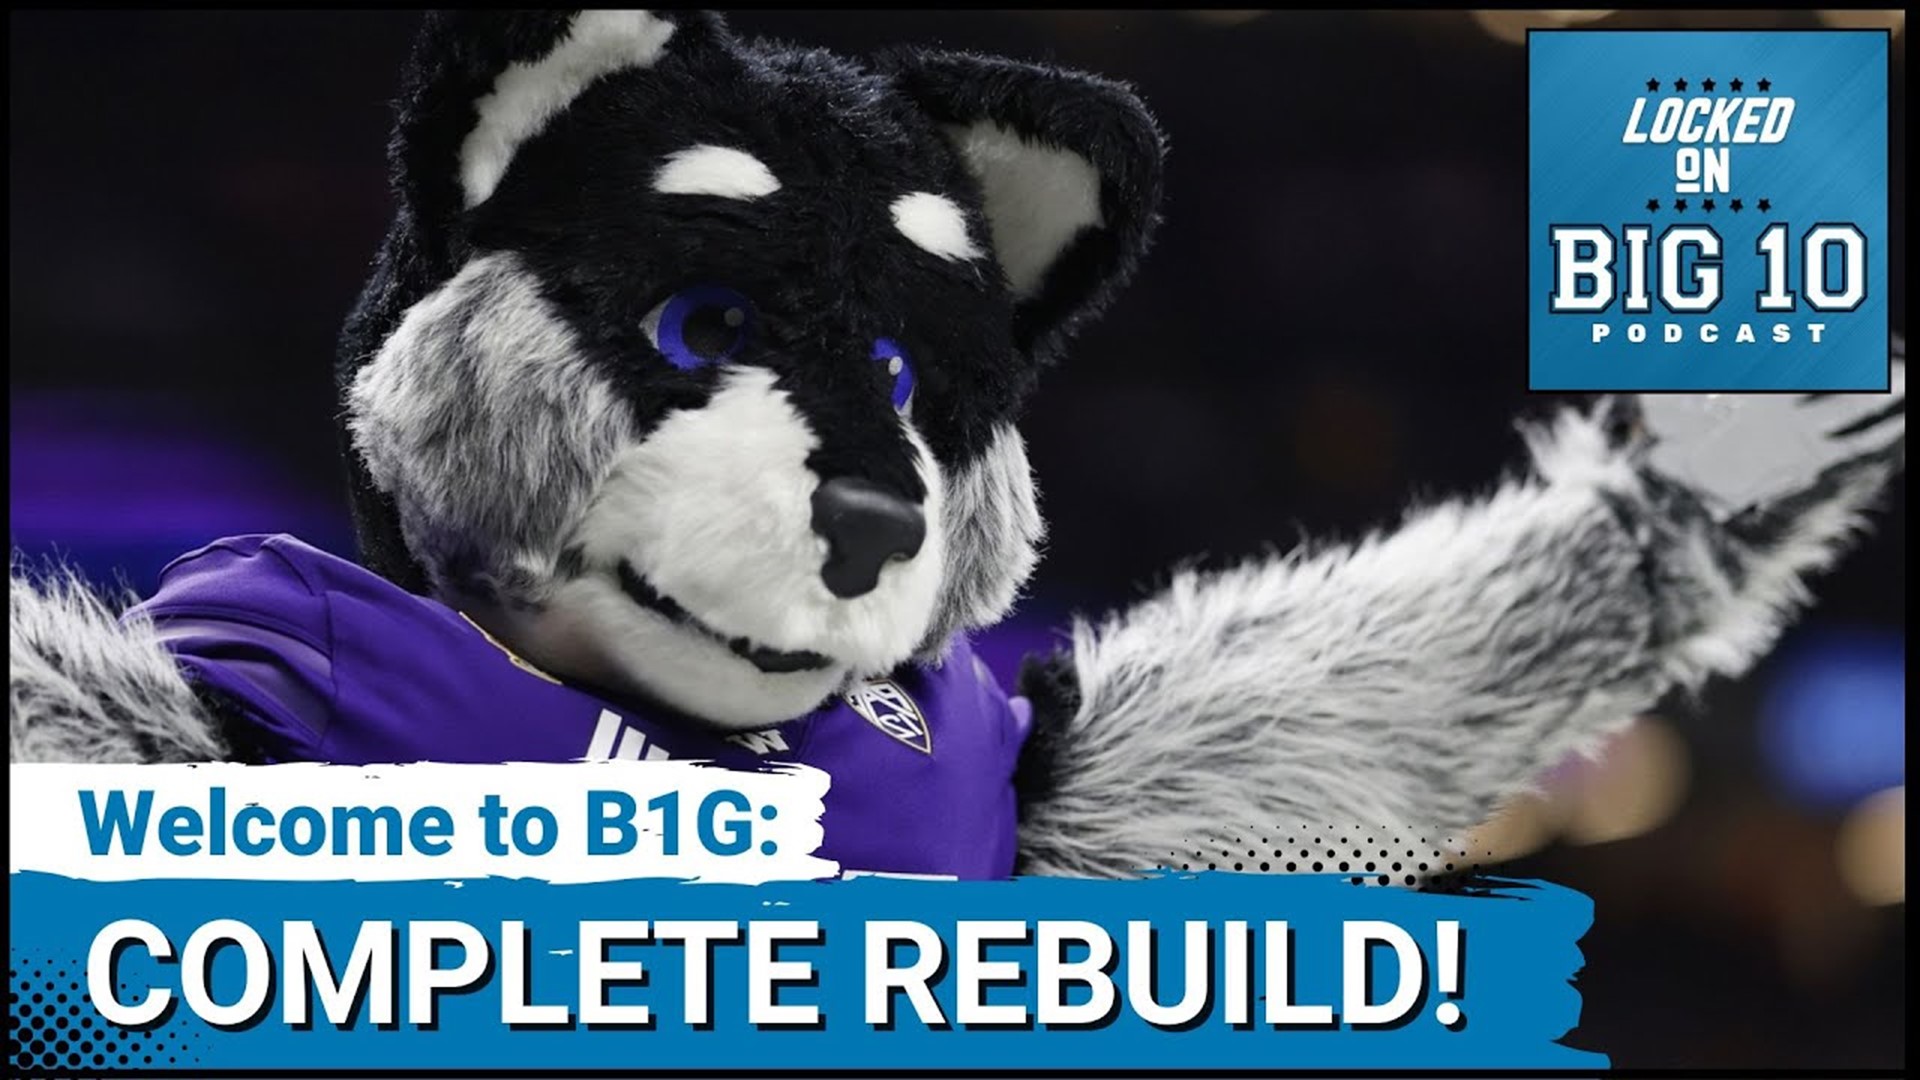 The Washington Huskies football team is going to go from appearing in the National Championship to completely rebuilding the roster as it enters the Big 10